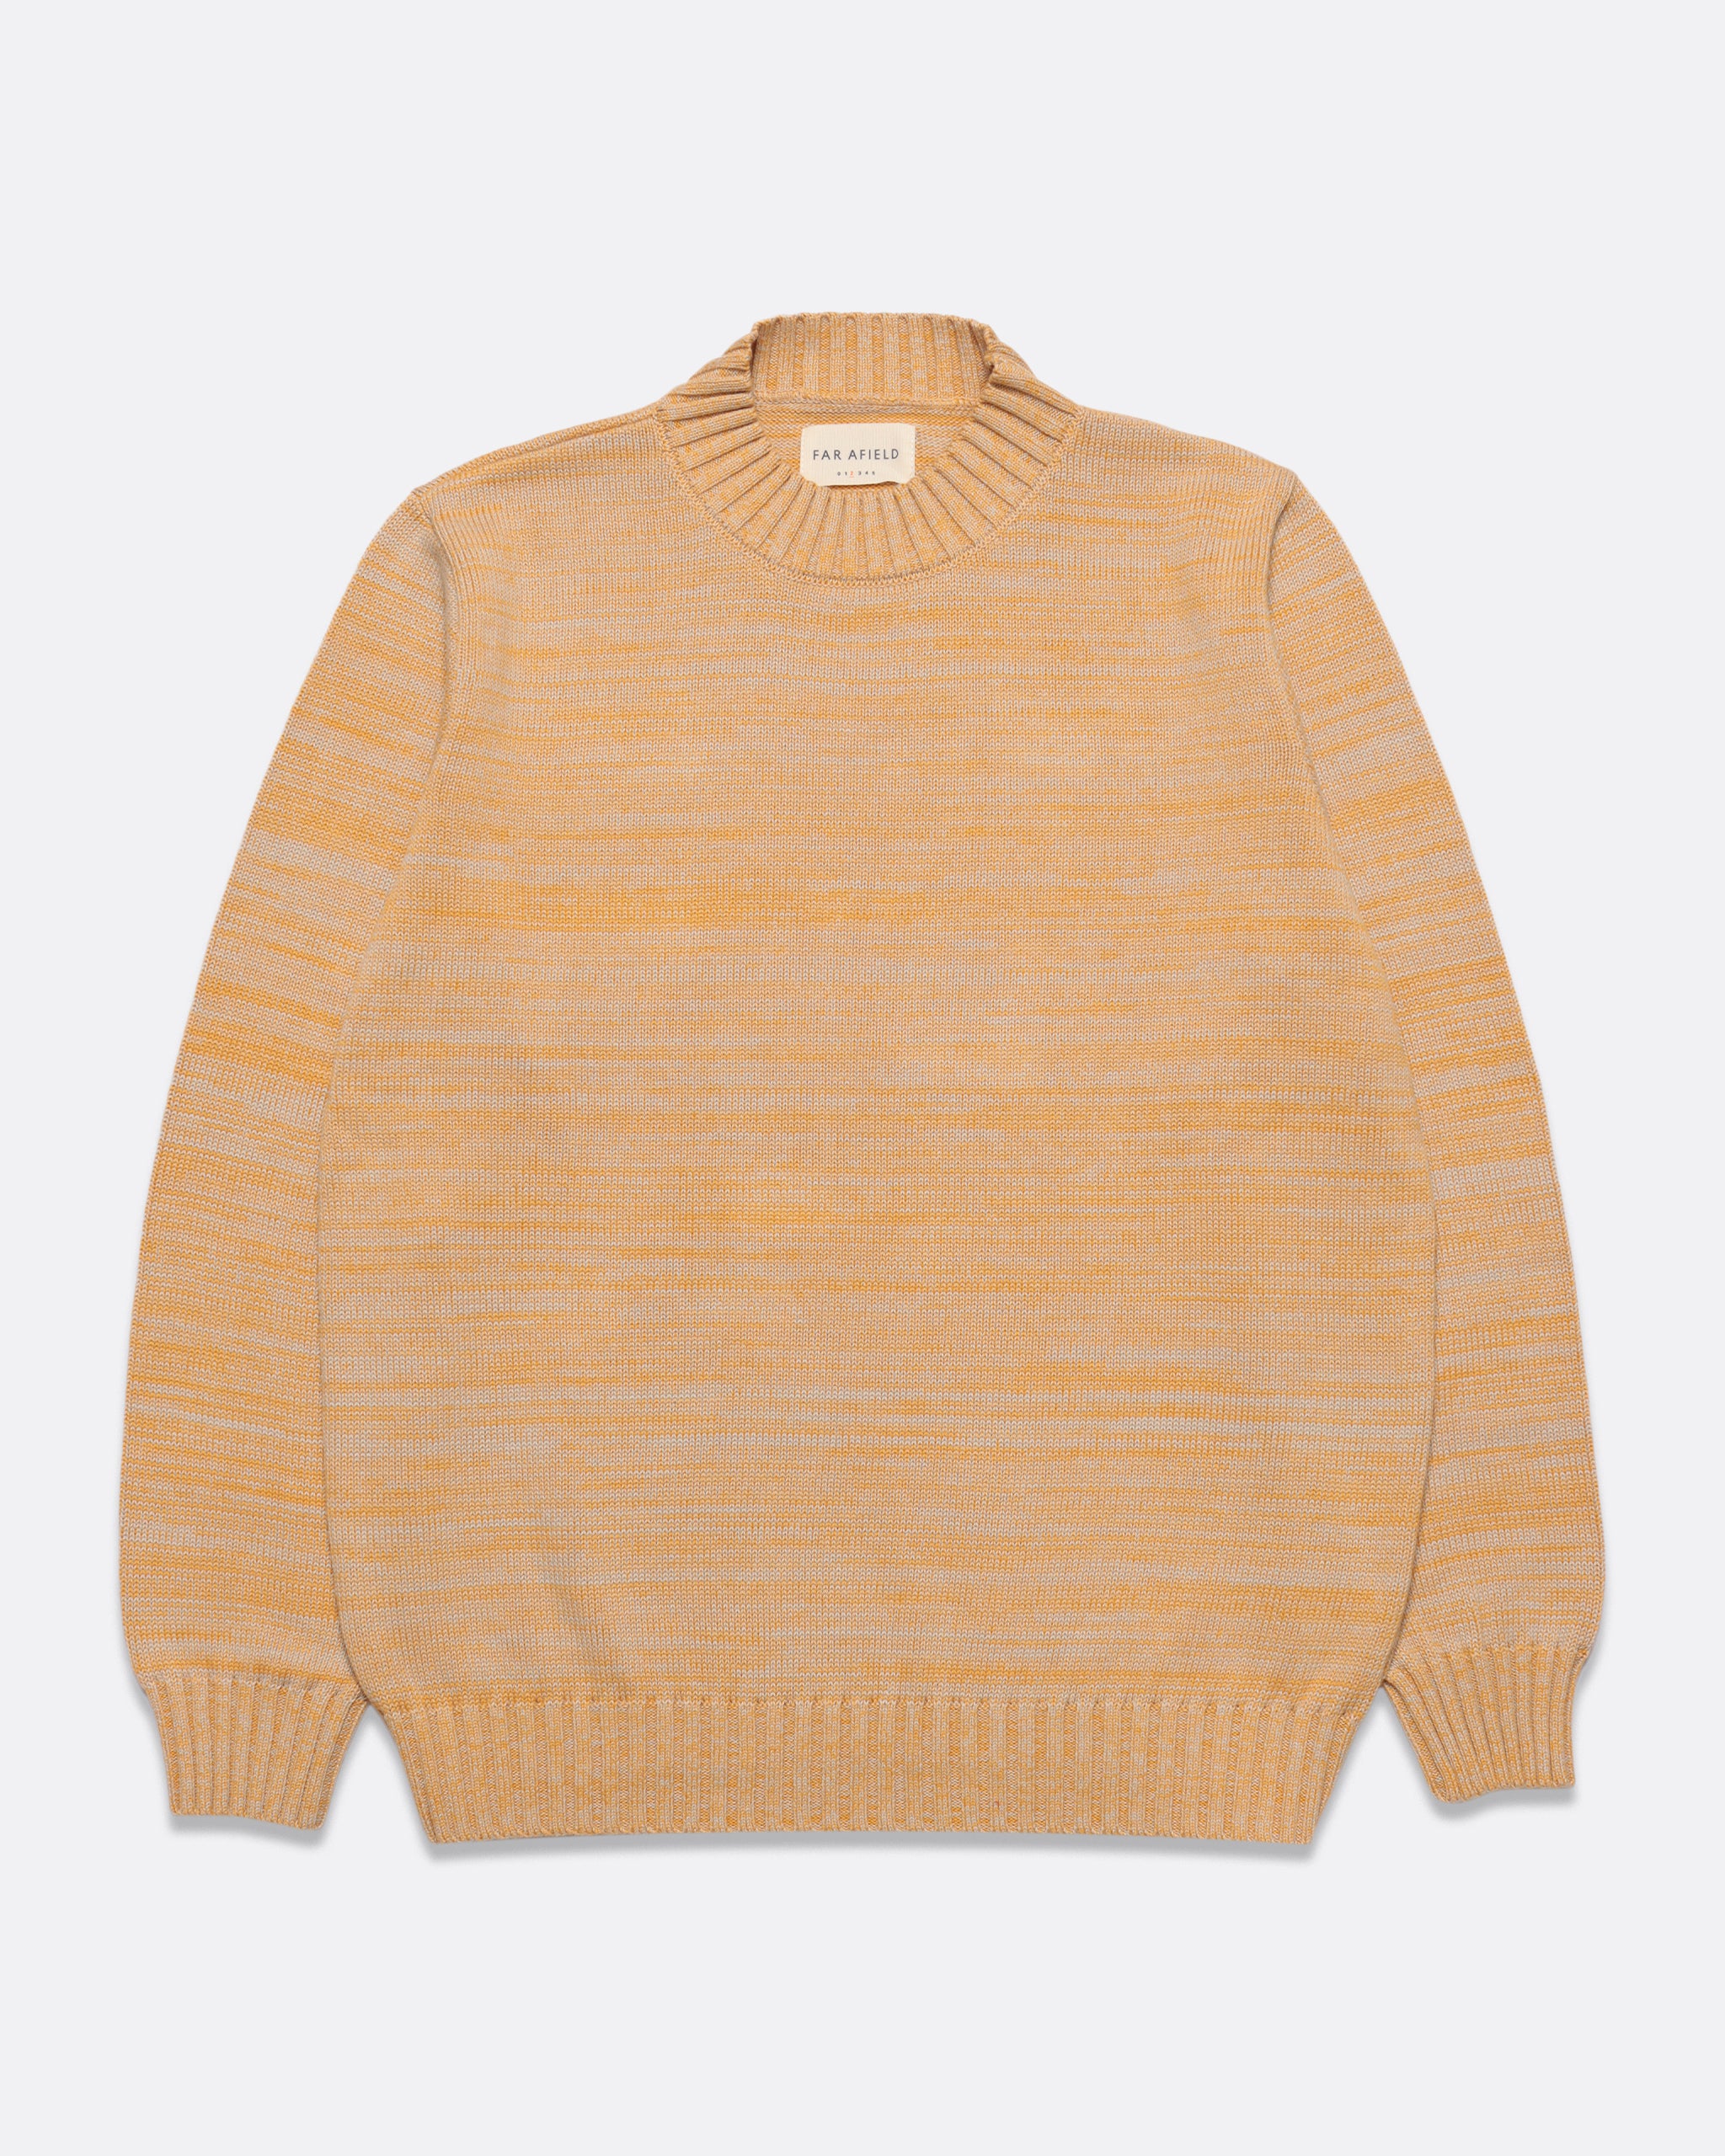 DIETER KNIT - HONEY GOLD / SAND TWISTED YARN